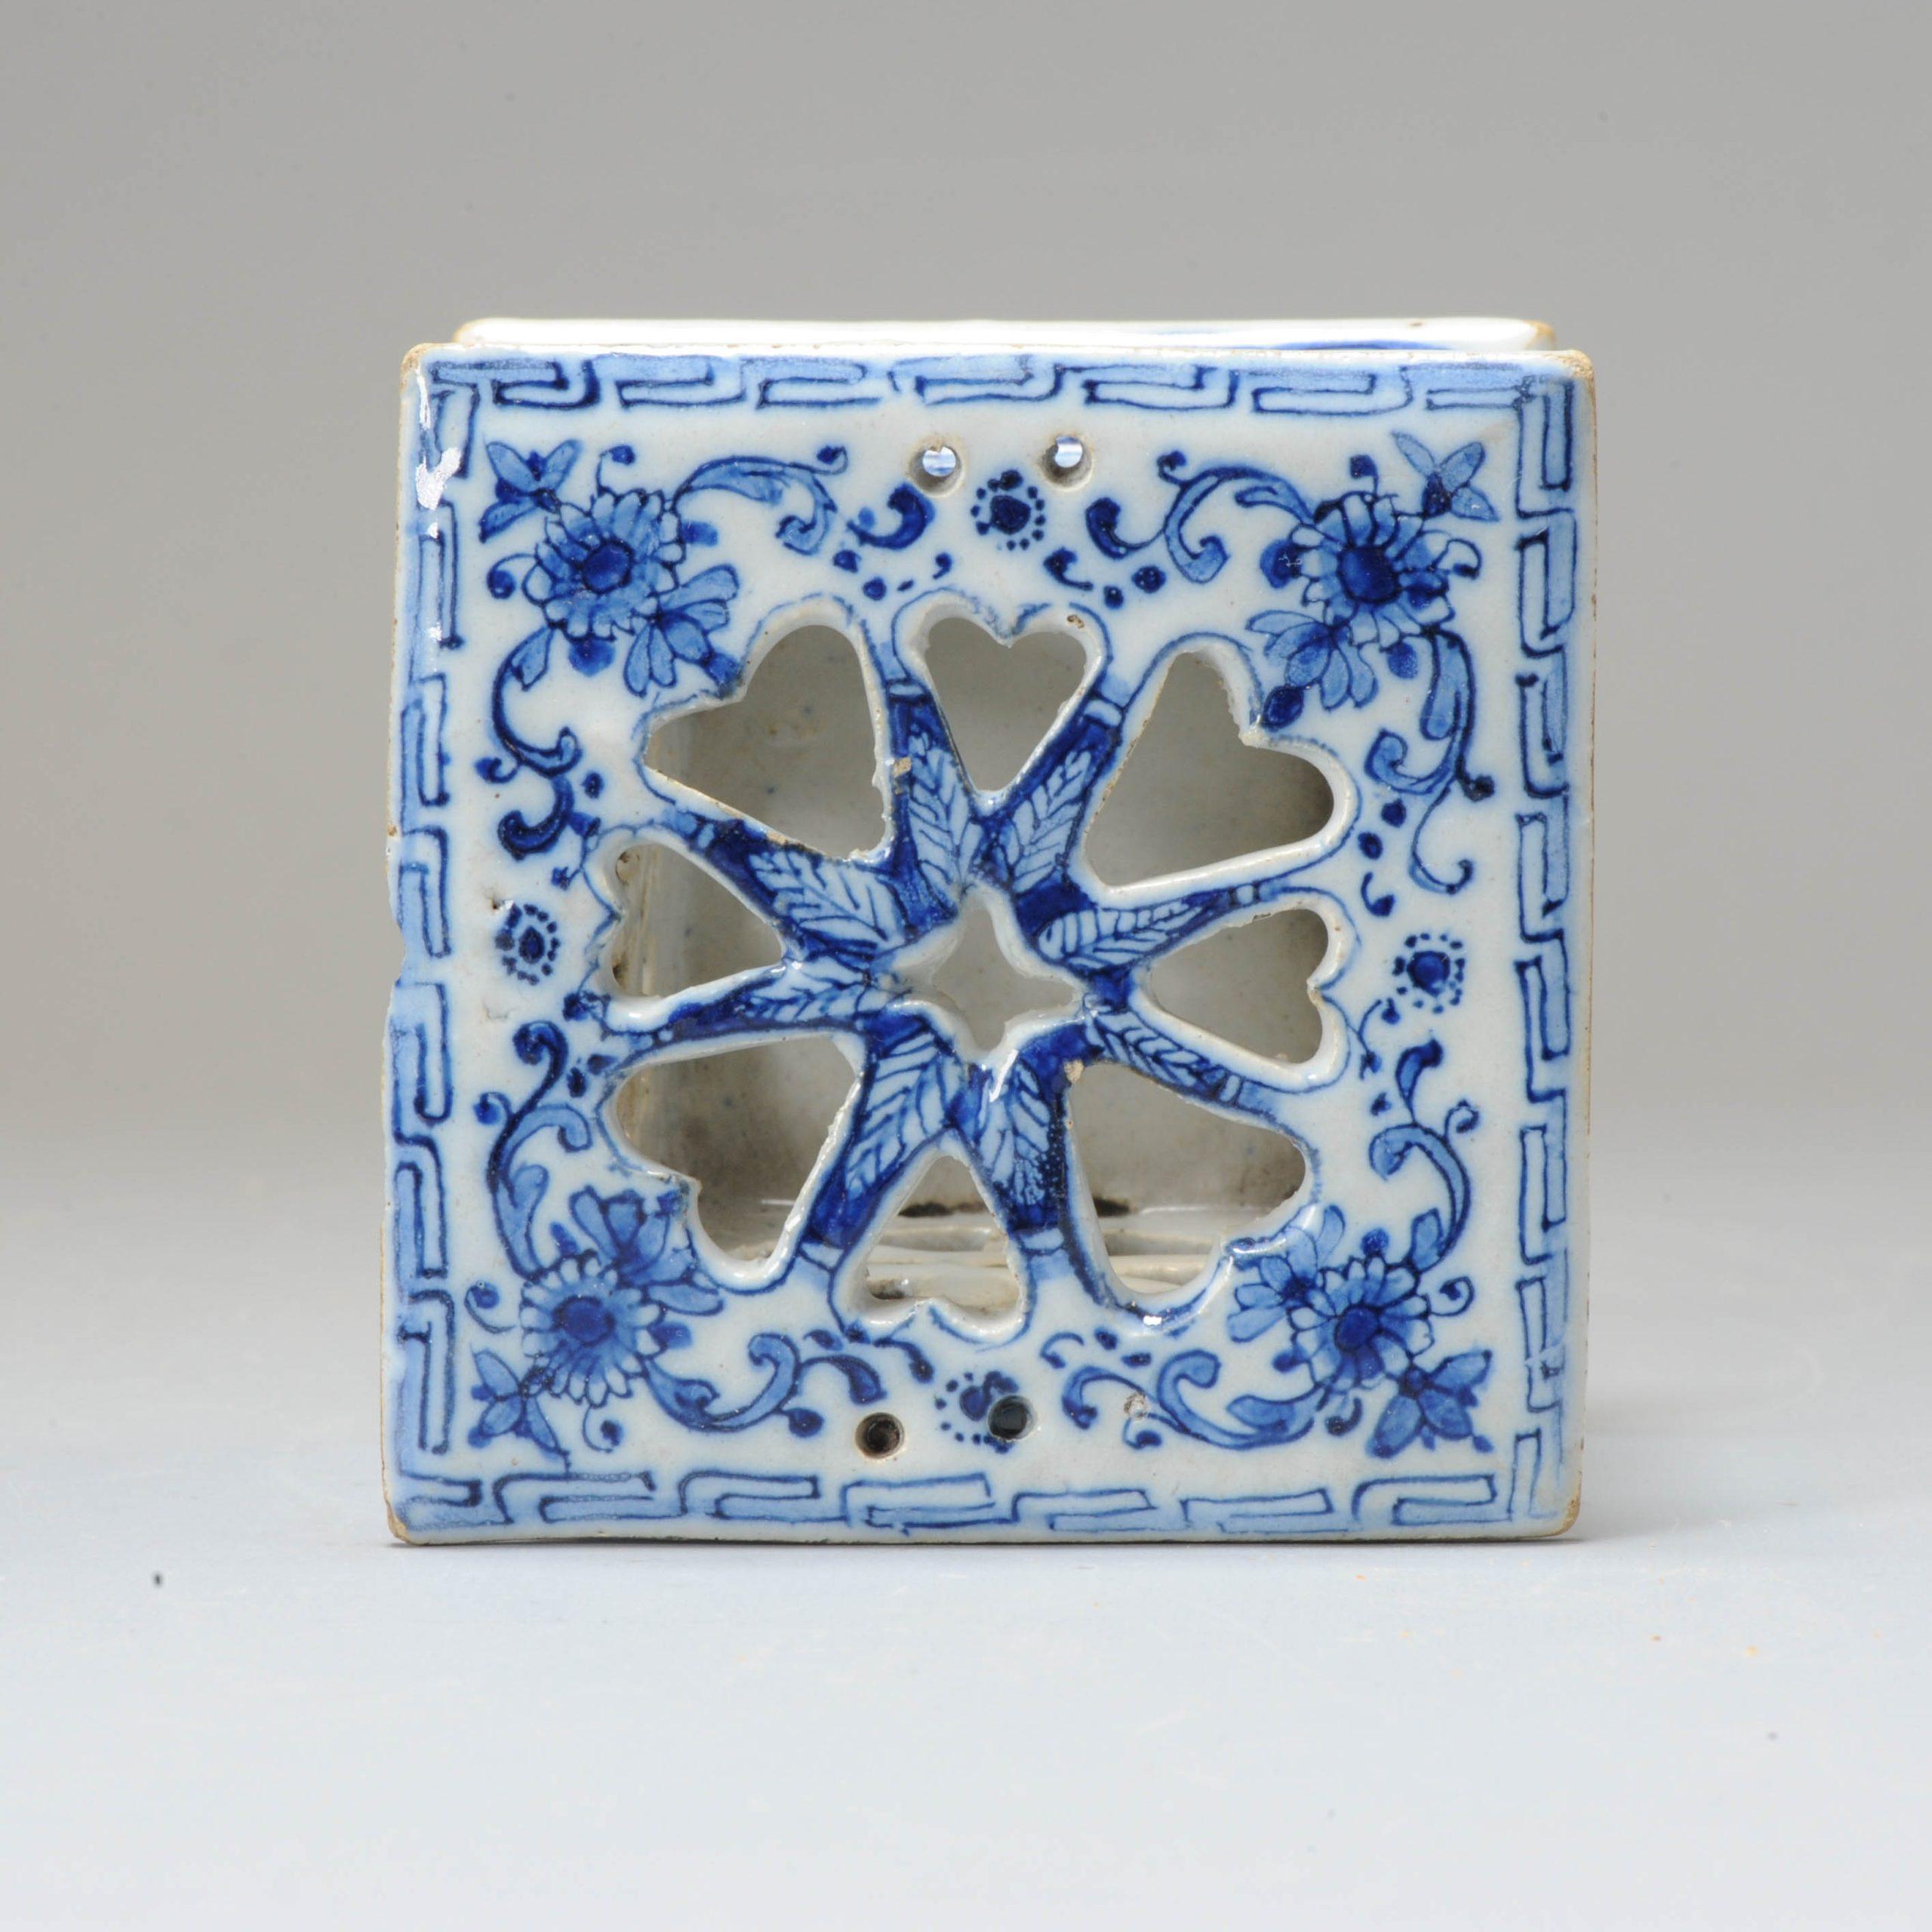 Unusual Miniature Stoof, Delftware Dutch Piece For a Doll House.

Additional information:
Material: Porcelain & Pottery
Color: Blue & White
Region of Origin: Europe
Period: 18th century
Condition: Some fritting/chips and 1 larger chip to underside